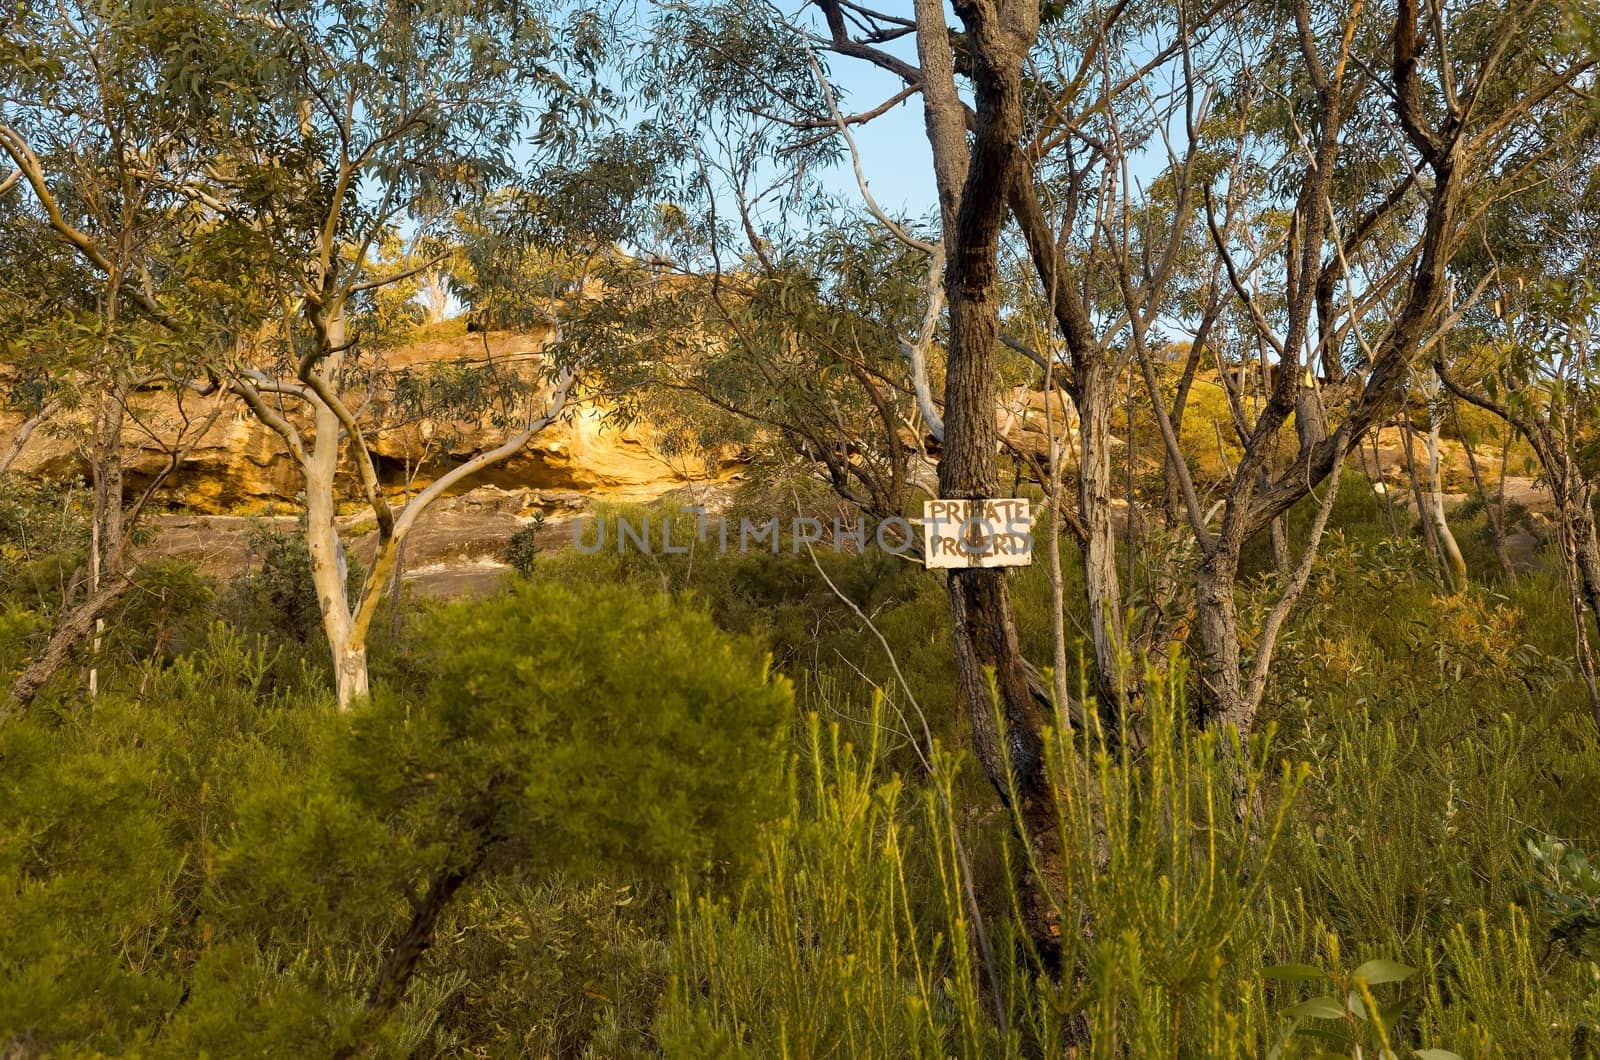 Photograph of Private property sign in the Australian Bush.